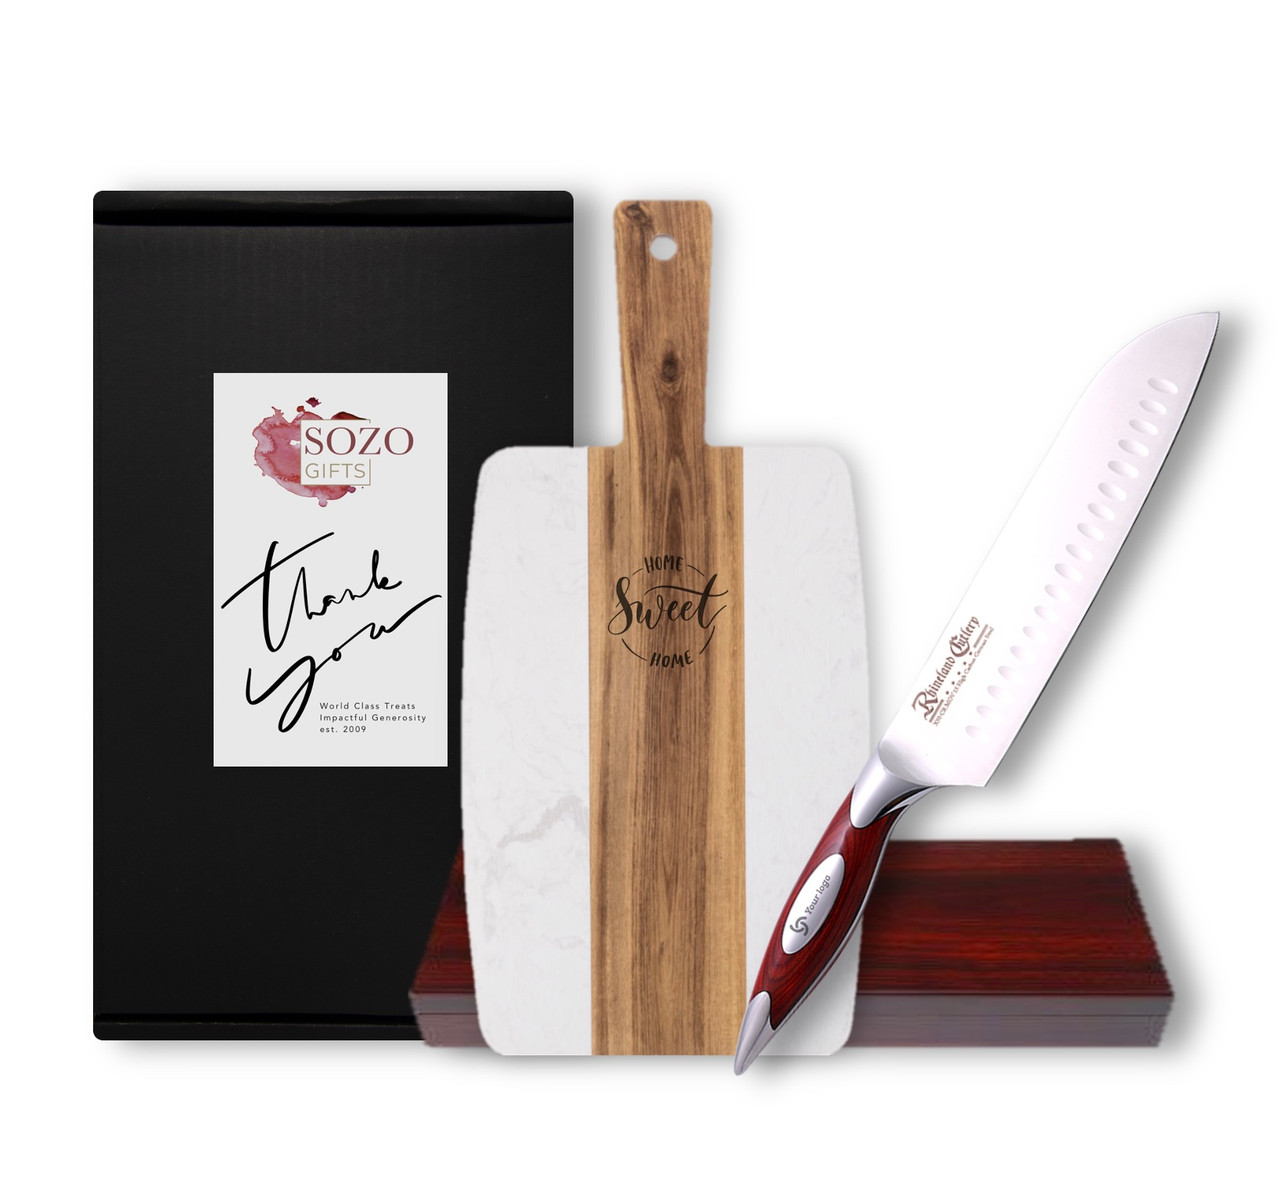 https://cdn11.bigcommerce.com/s-kgihy4hax9/images/stencil/1280x1280/products/250/989/Sozo_Gifts_8_inch_Santoku_with_Wood_Marble_Board_Gift_Box-ALT__44349.1651612896.jpg?c=1